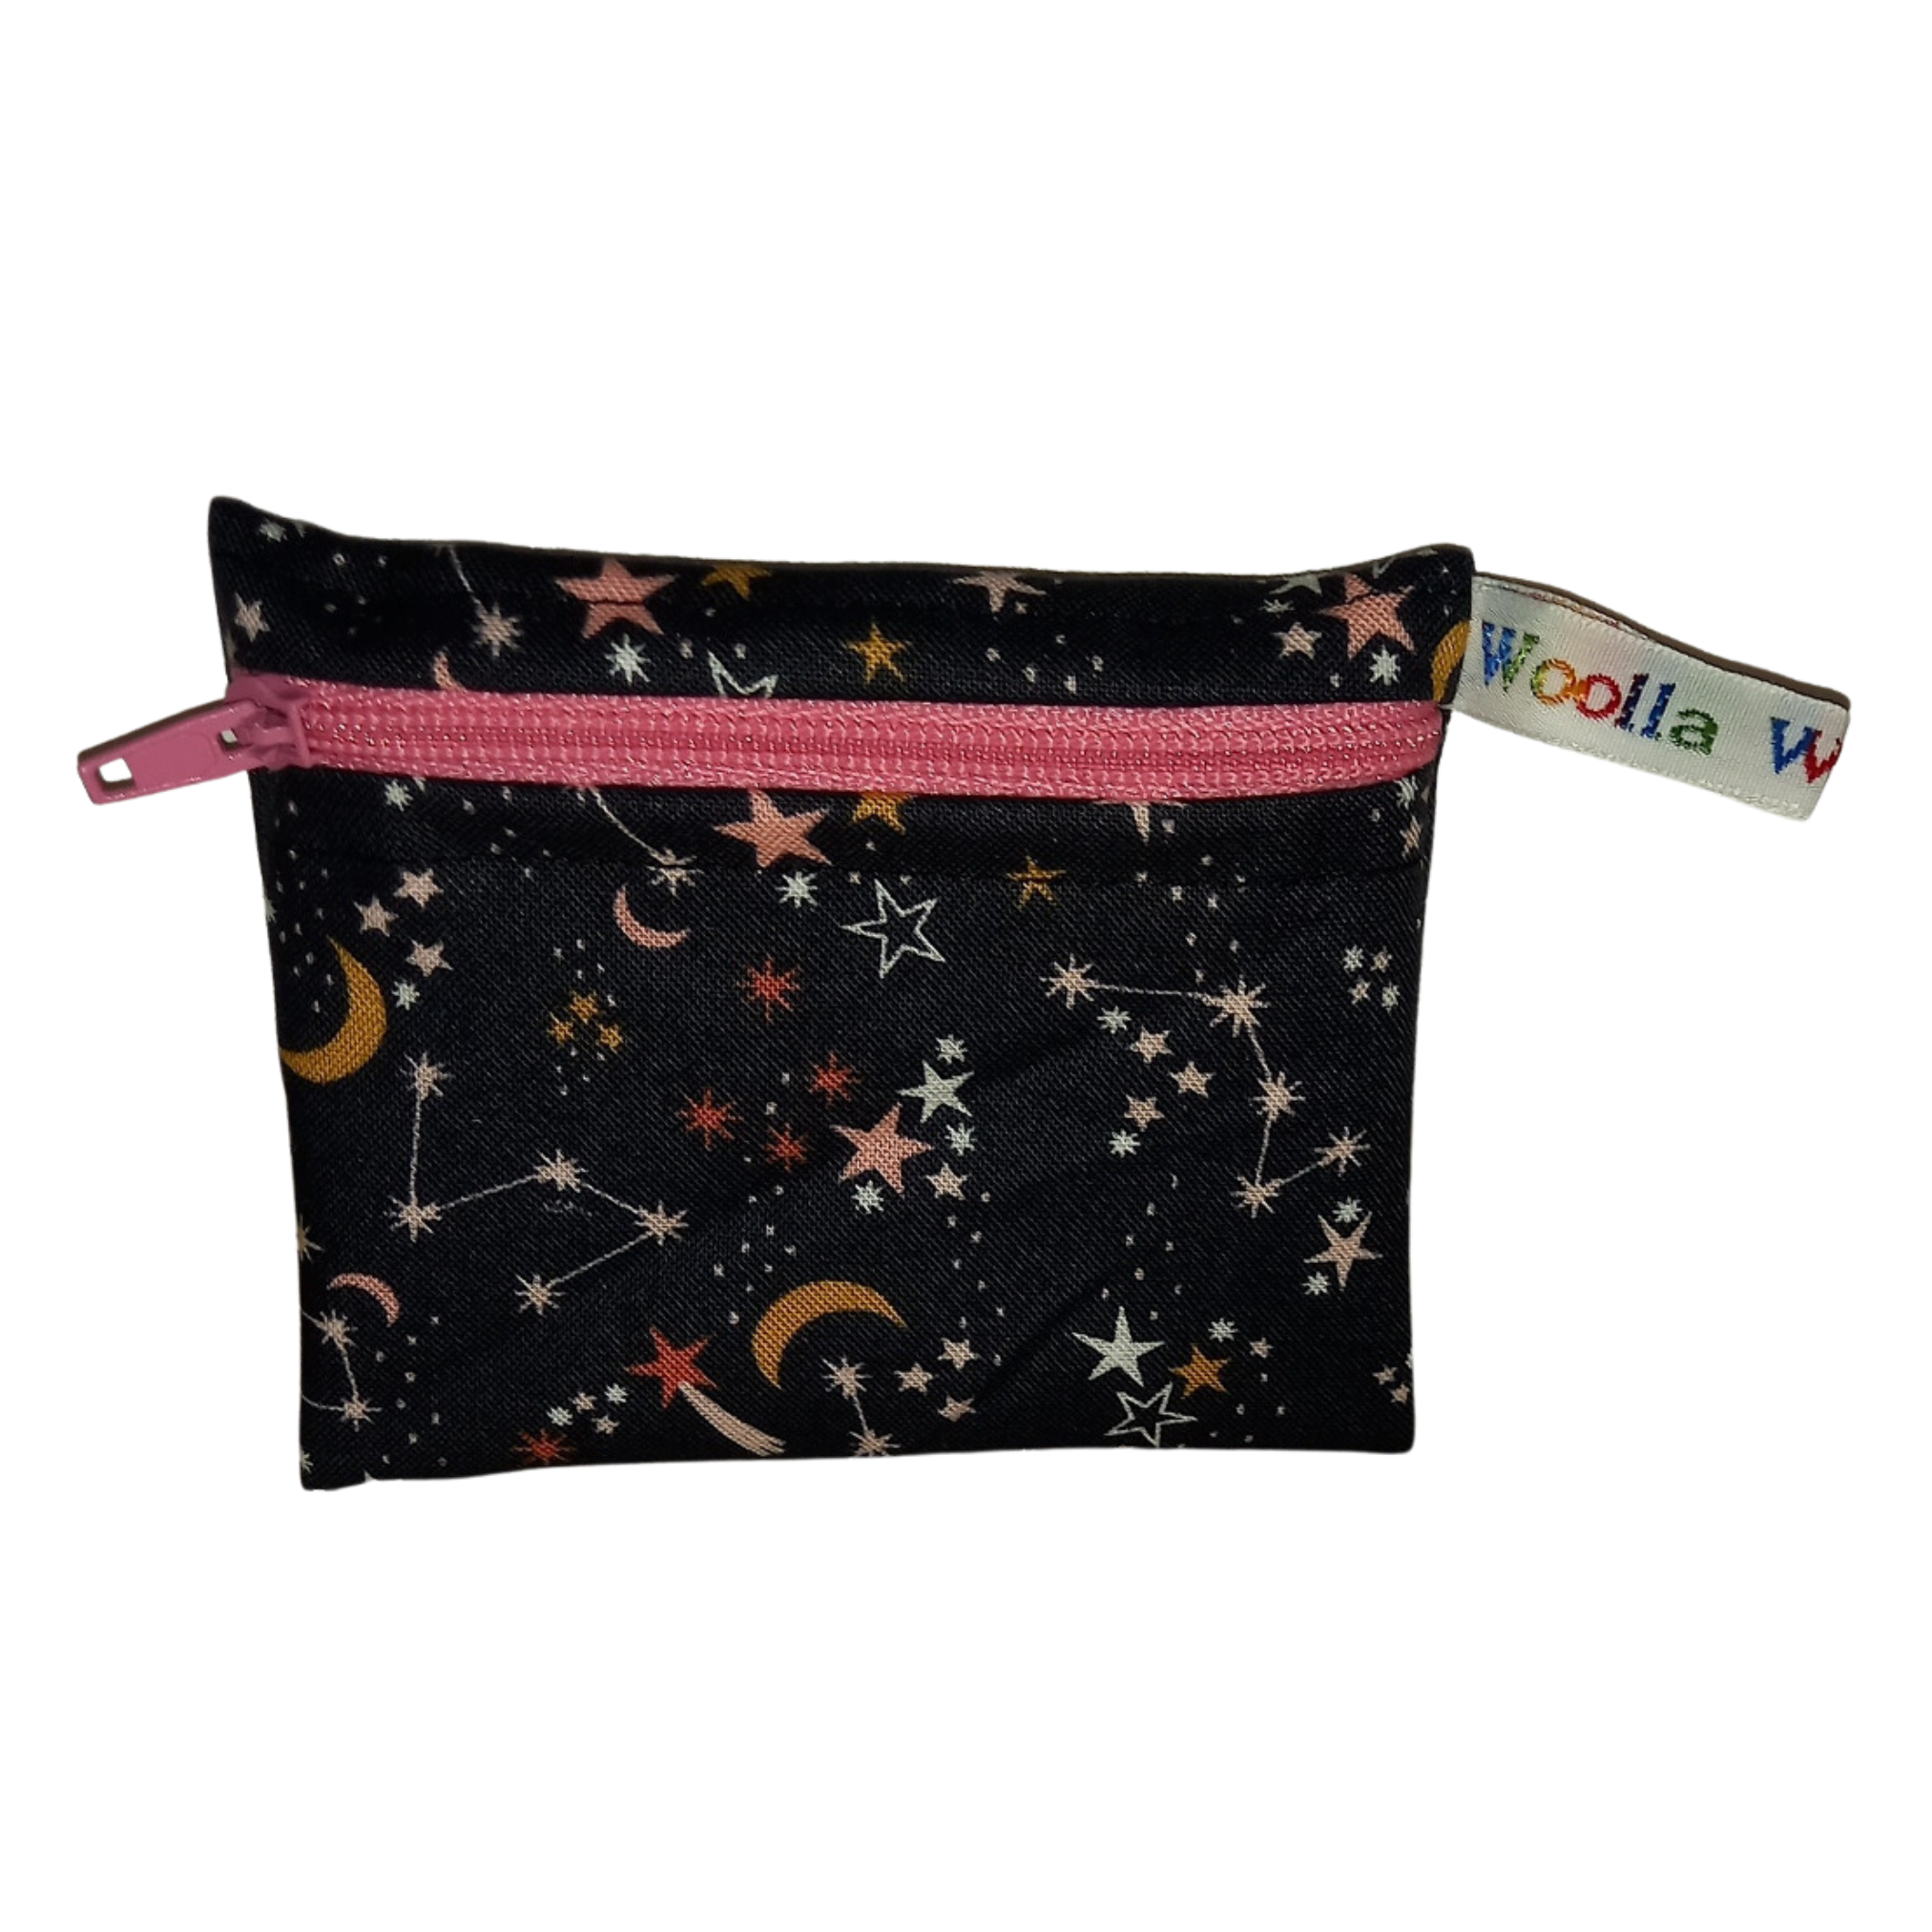 Under The stars - Snack Bag - Small Pippins Waterproof Pouch for Food, Makeup and more, Eco-Friendly and Washable Lunch, Travel, and Storage